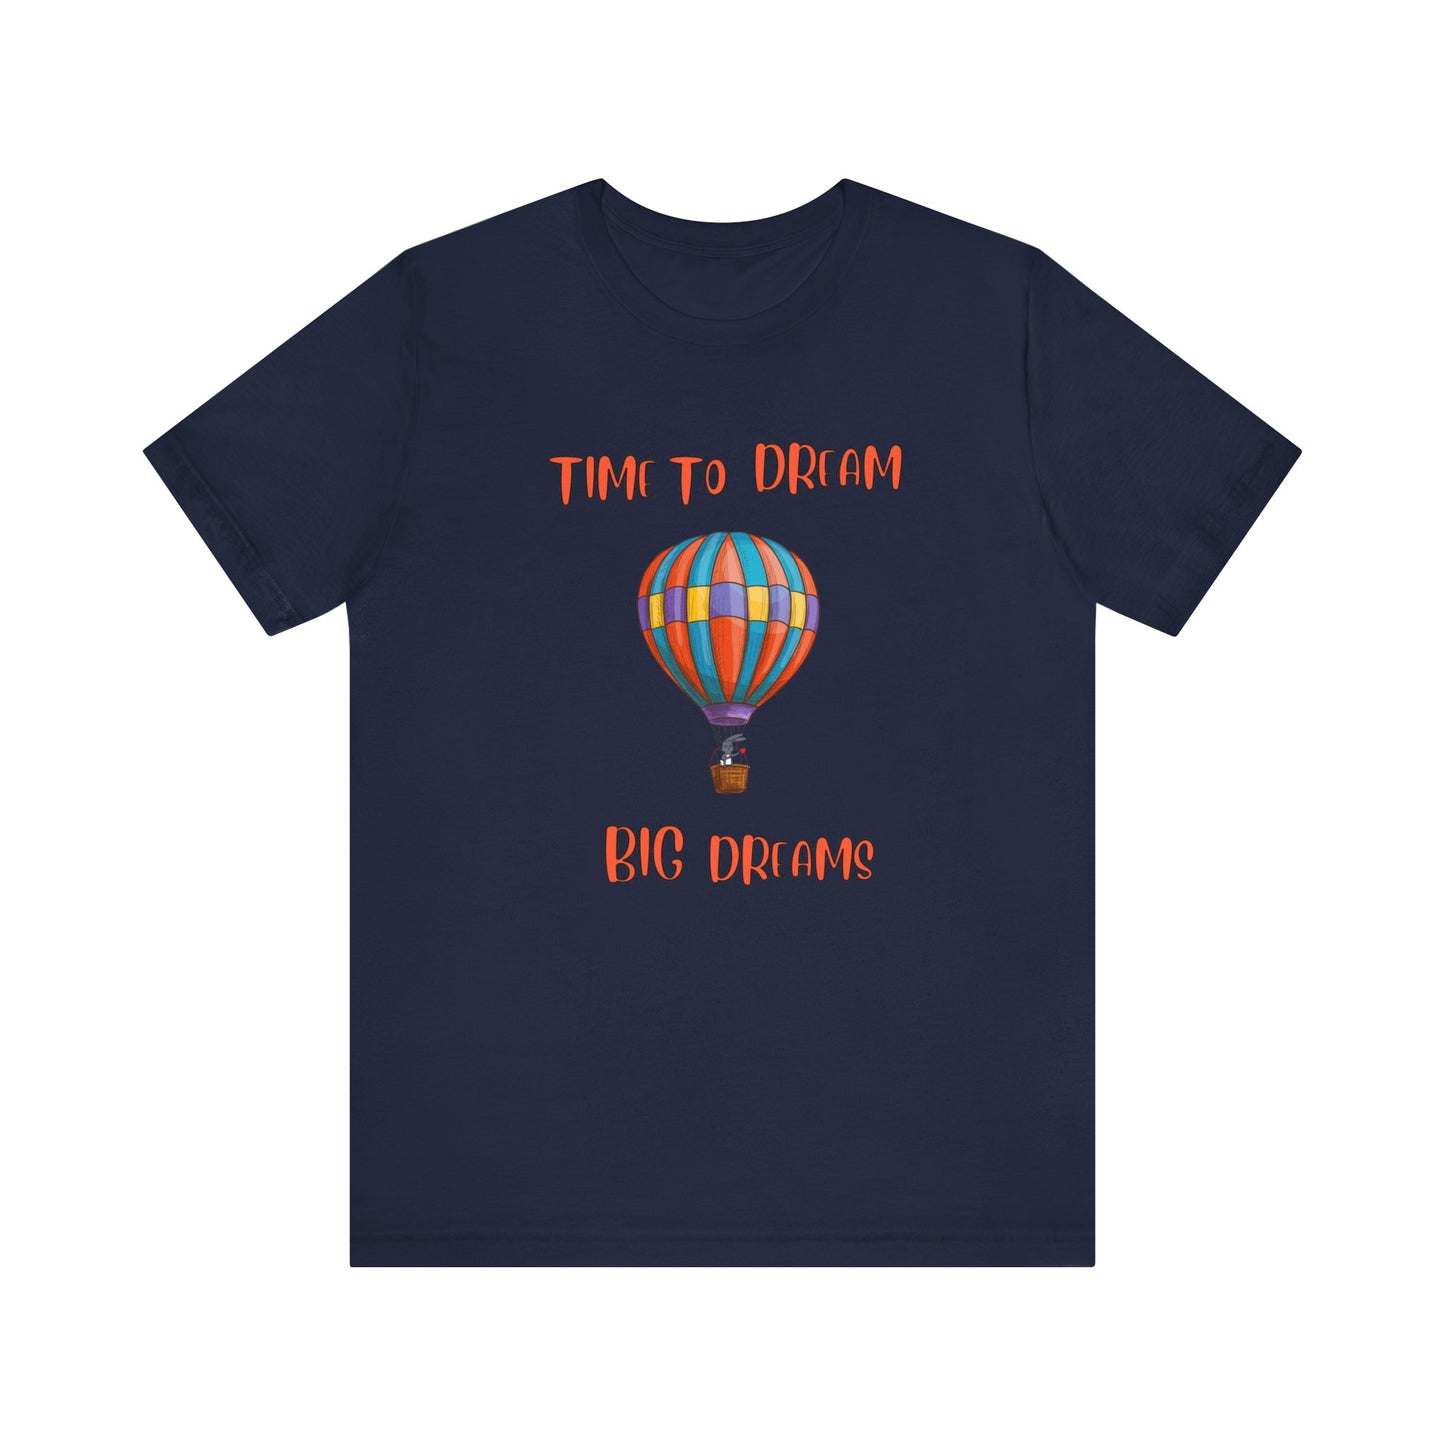 Time To Dream Big dreams. Unisex Jersey Short Sleeve Tee